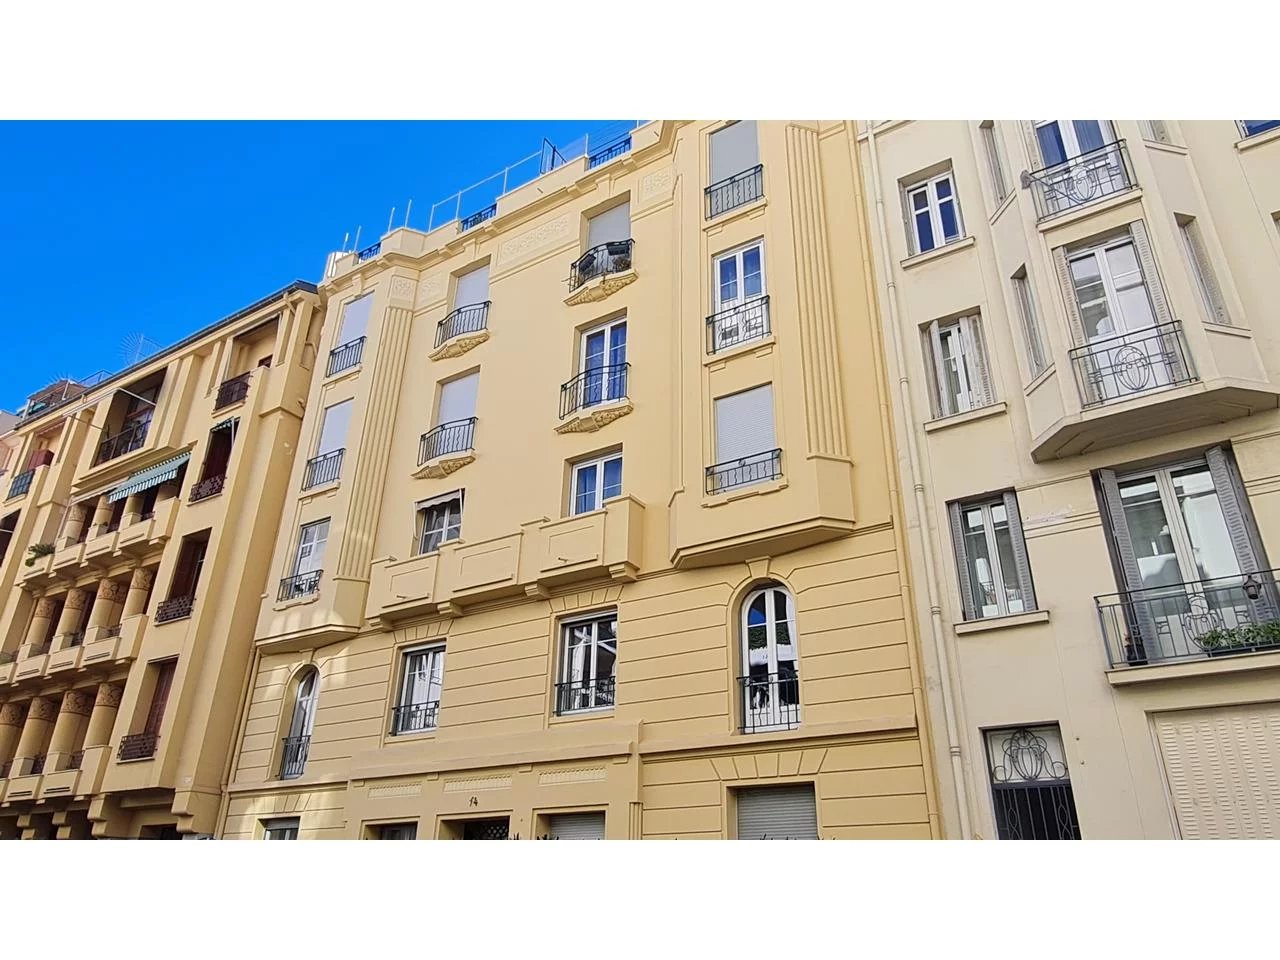 Appartement  3 Rooms 67m2  for sale   649 000 €